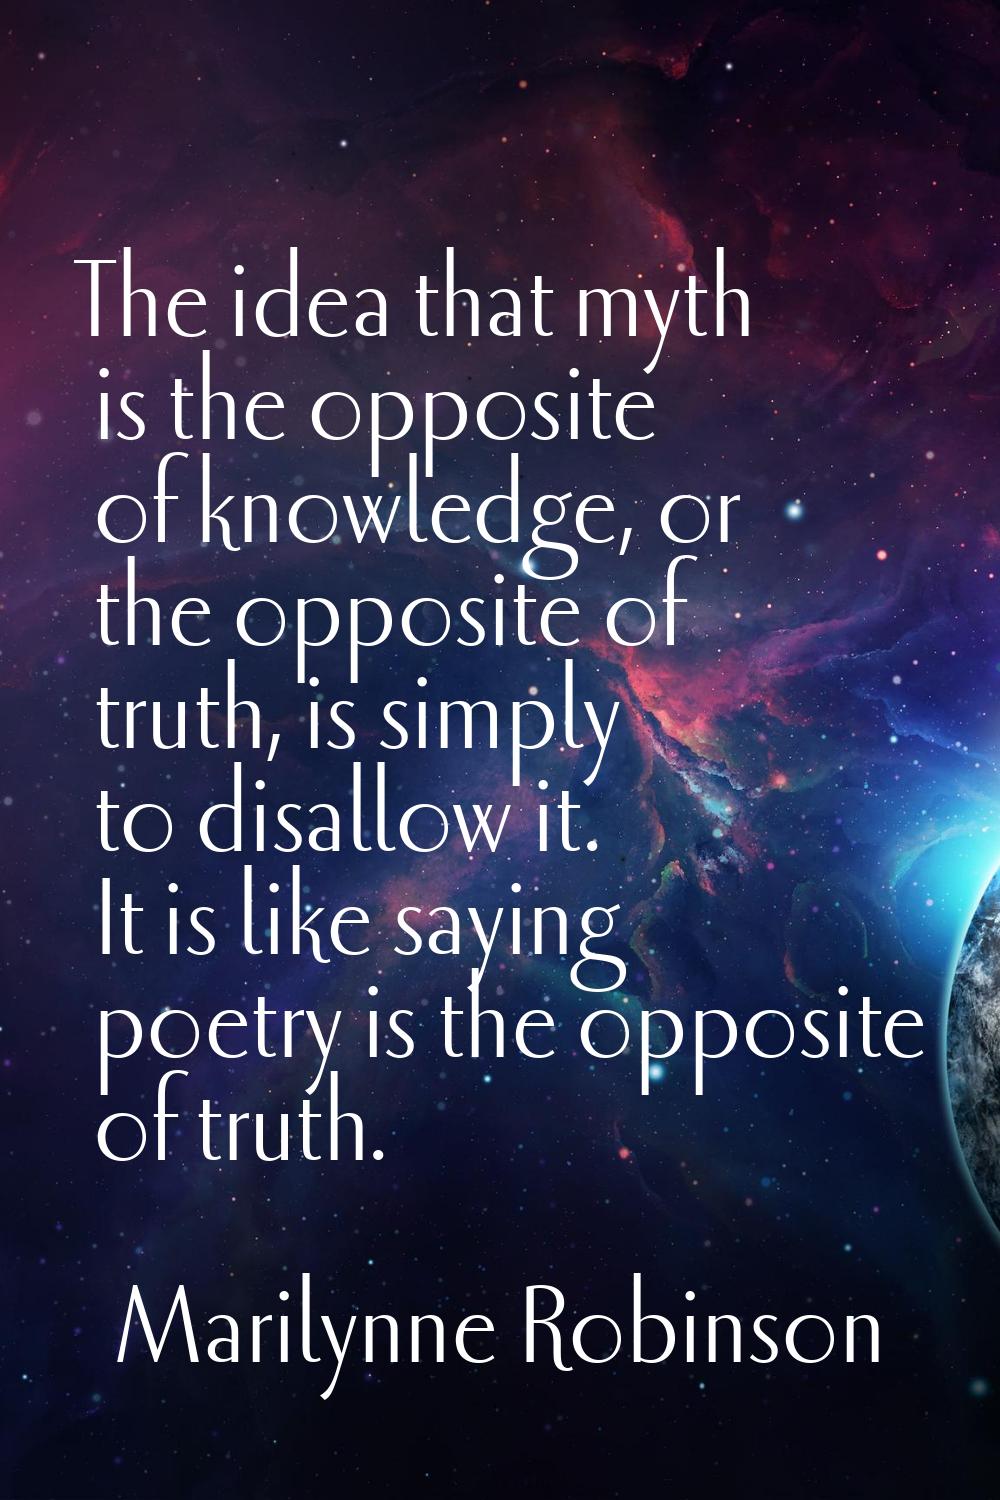 The idea that myth is the opposite of knowledge, or the opposite of truth, is simply to disallow it